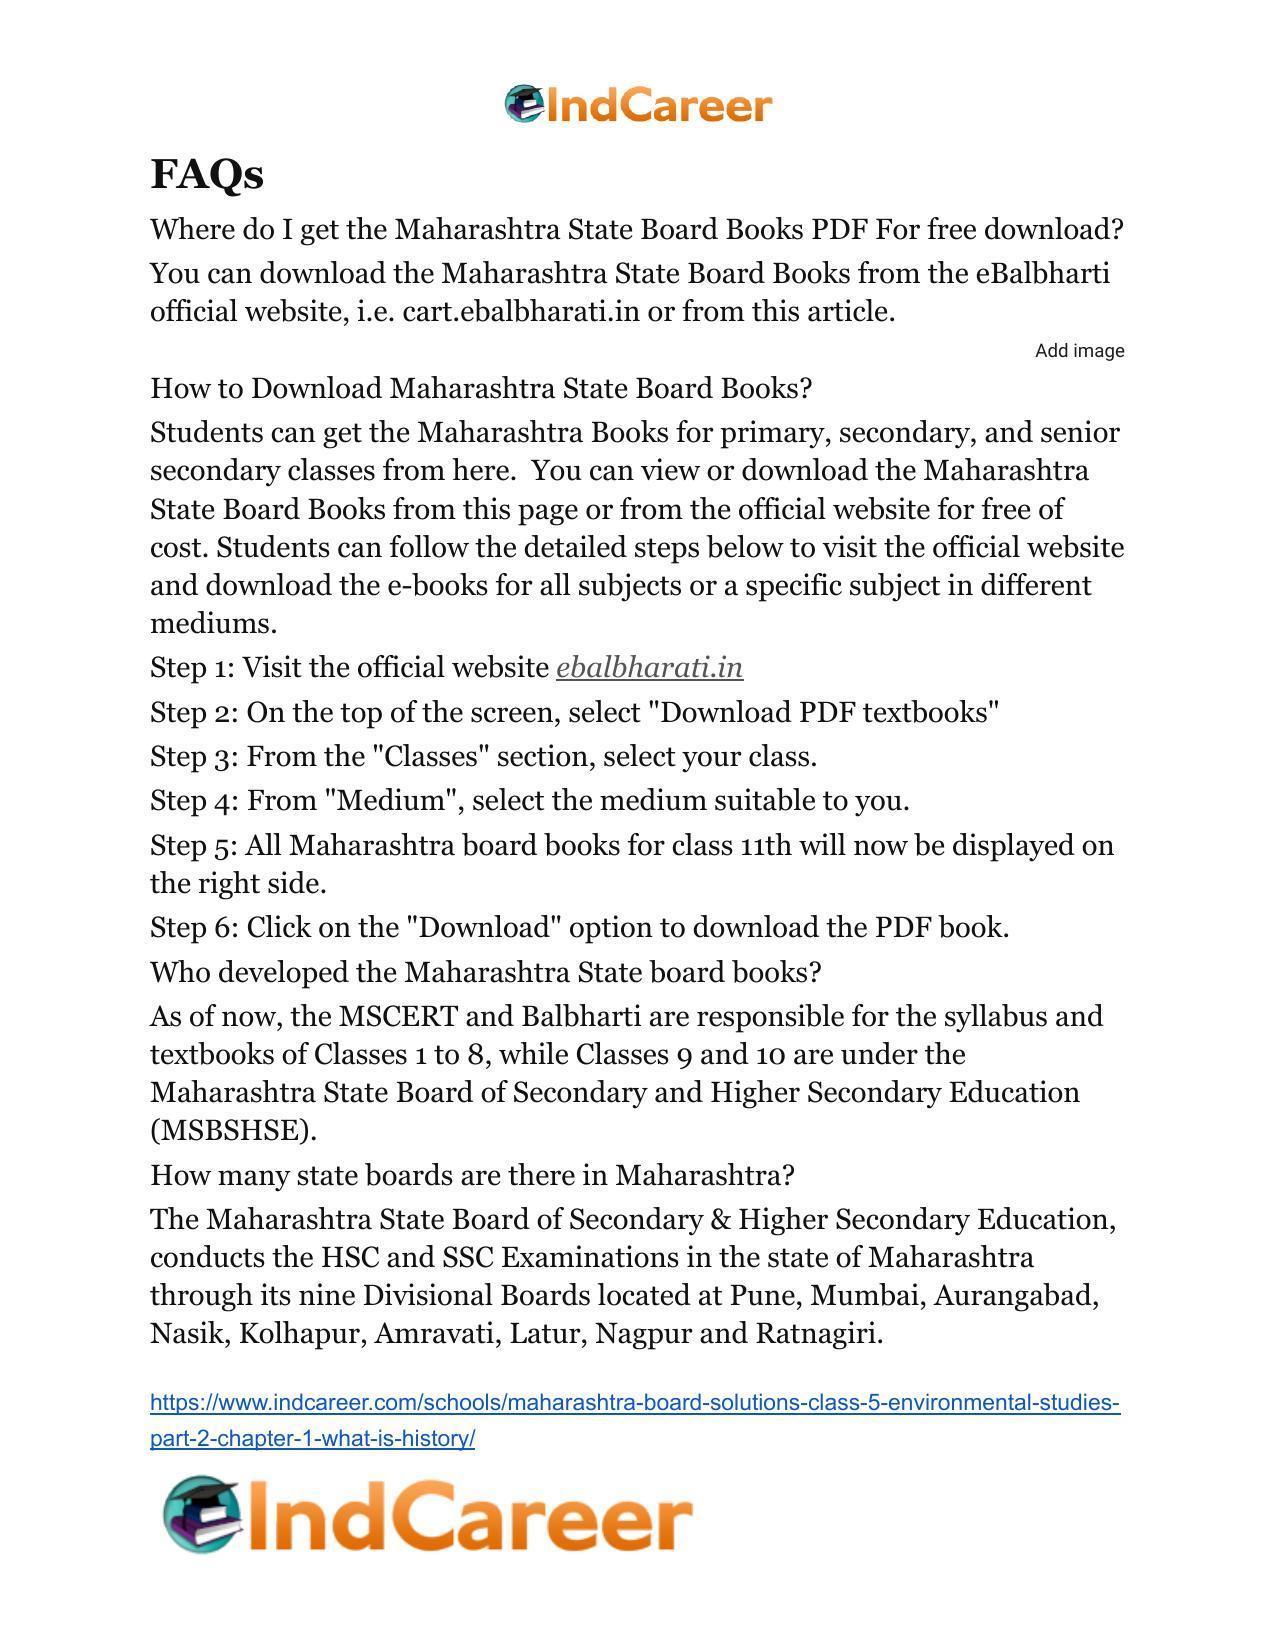 Maharashtra Board Solutions Class 5-Environmental Studies (Part 2): Chapter 1- What is History? - Page 20